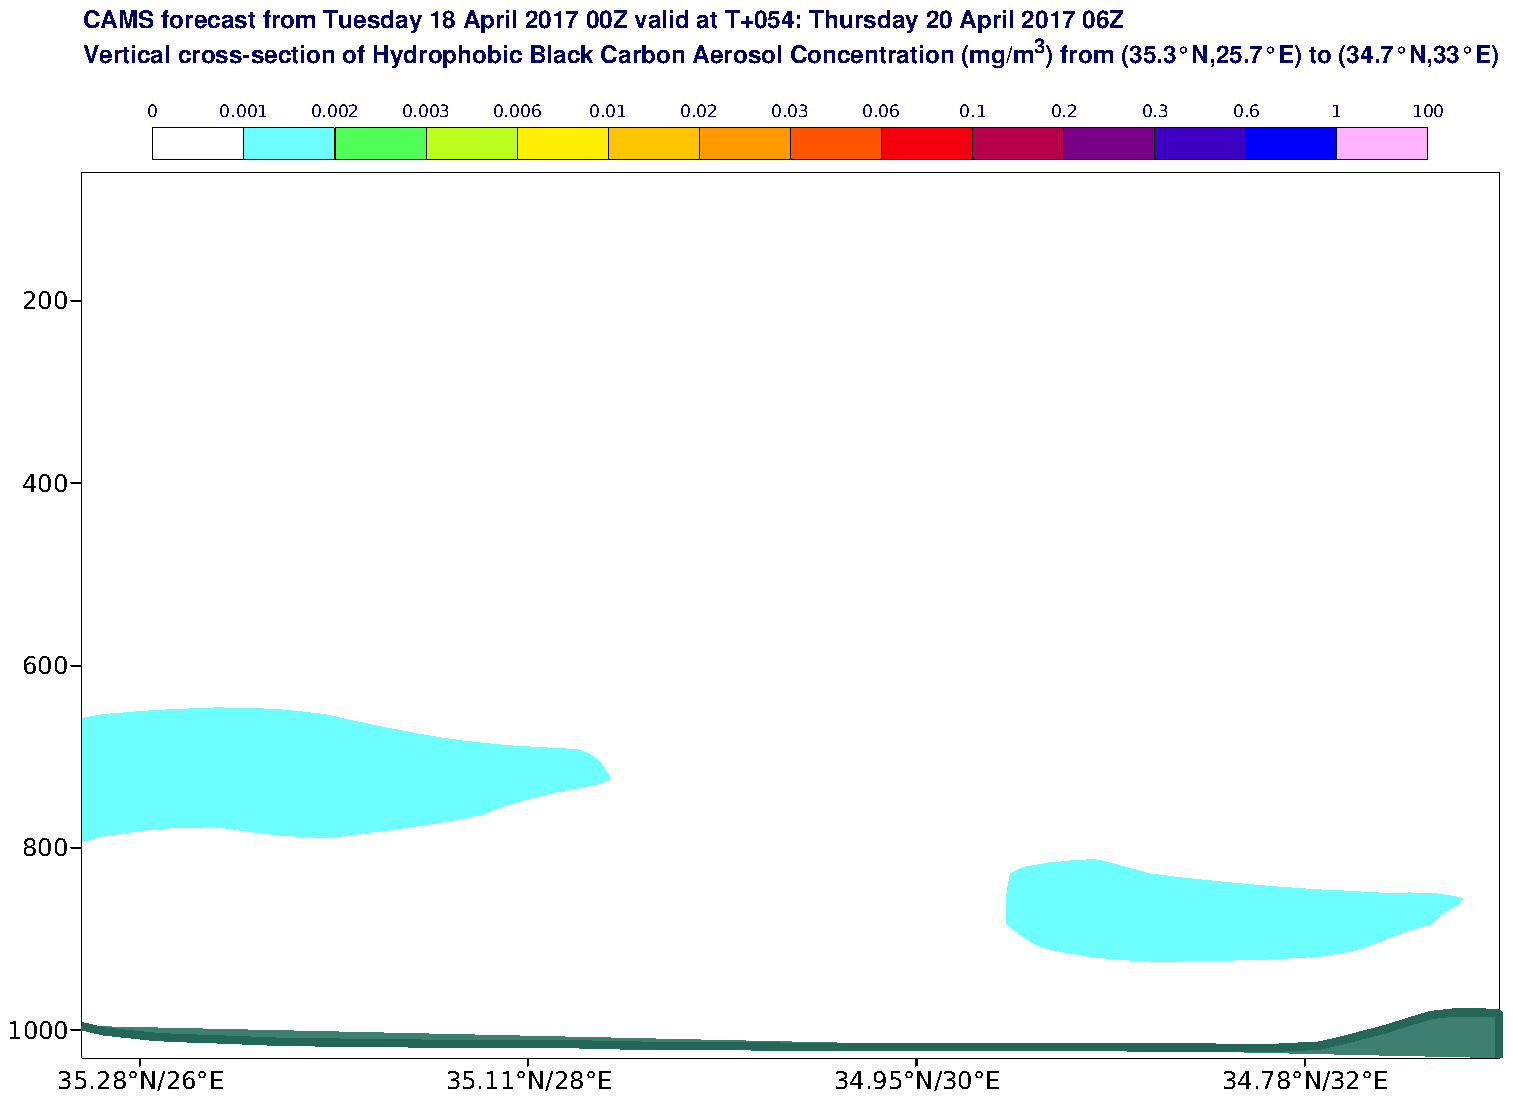 Vertical cross-section of Hydrophobic Black Carbon Aerosol Concentration (mg/m3) valid at T54 - 2017-04-20 06:00